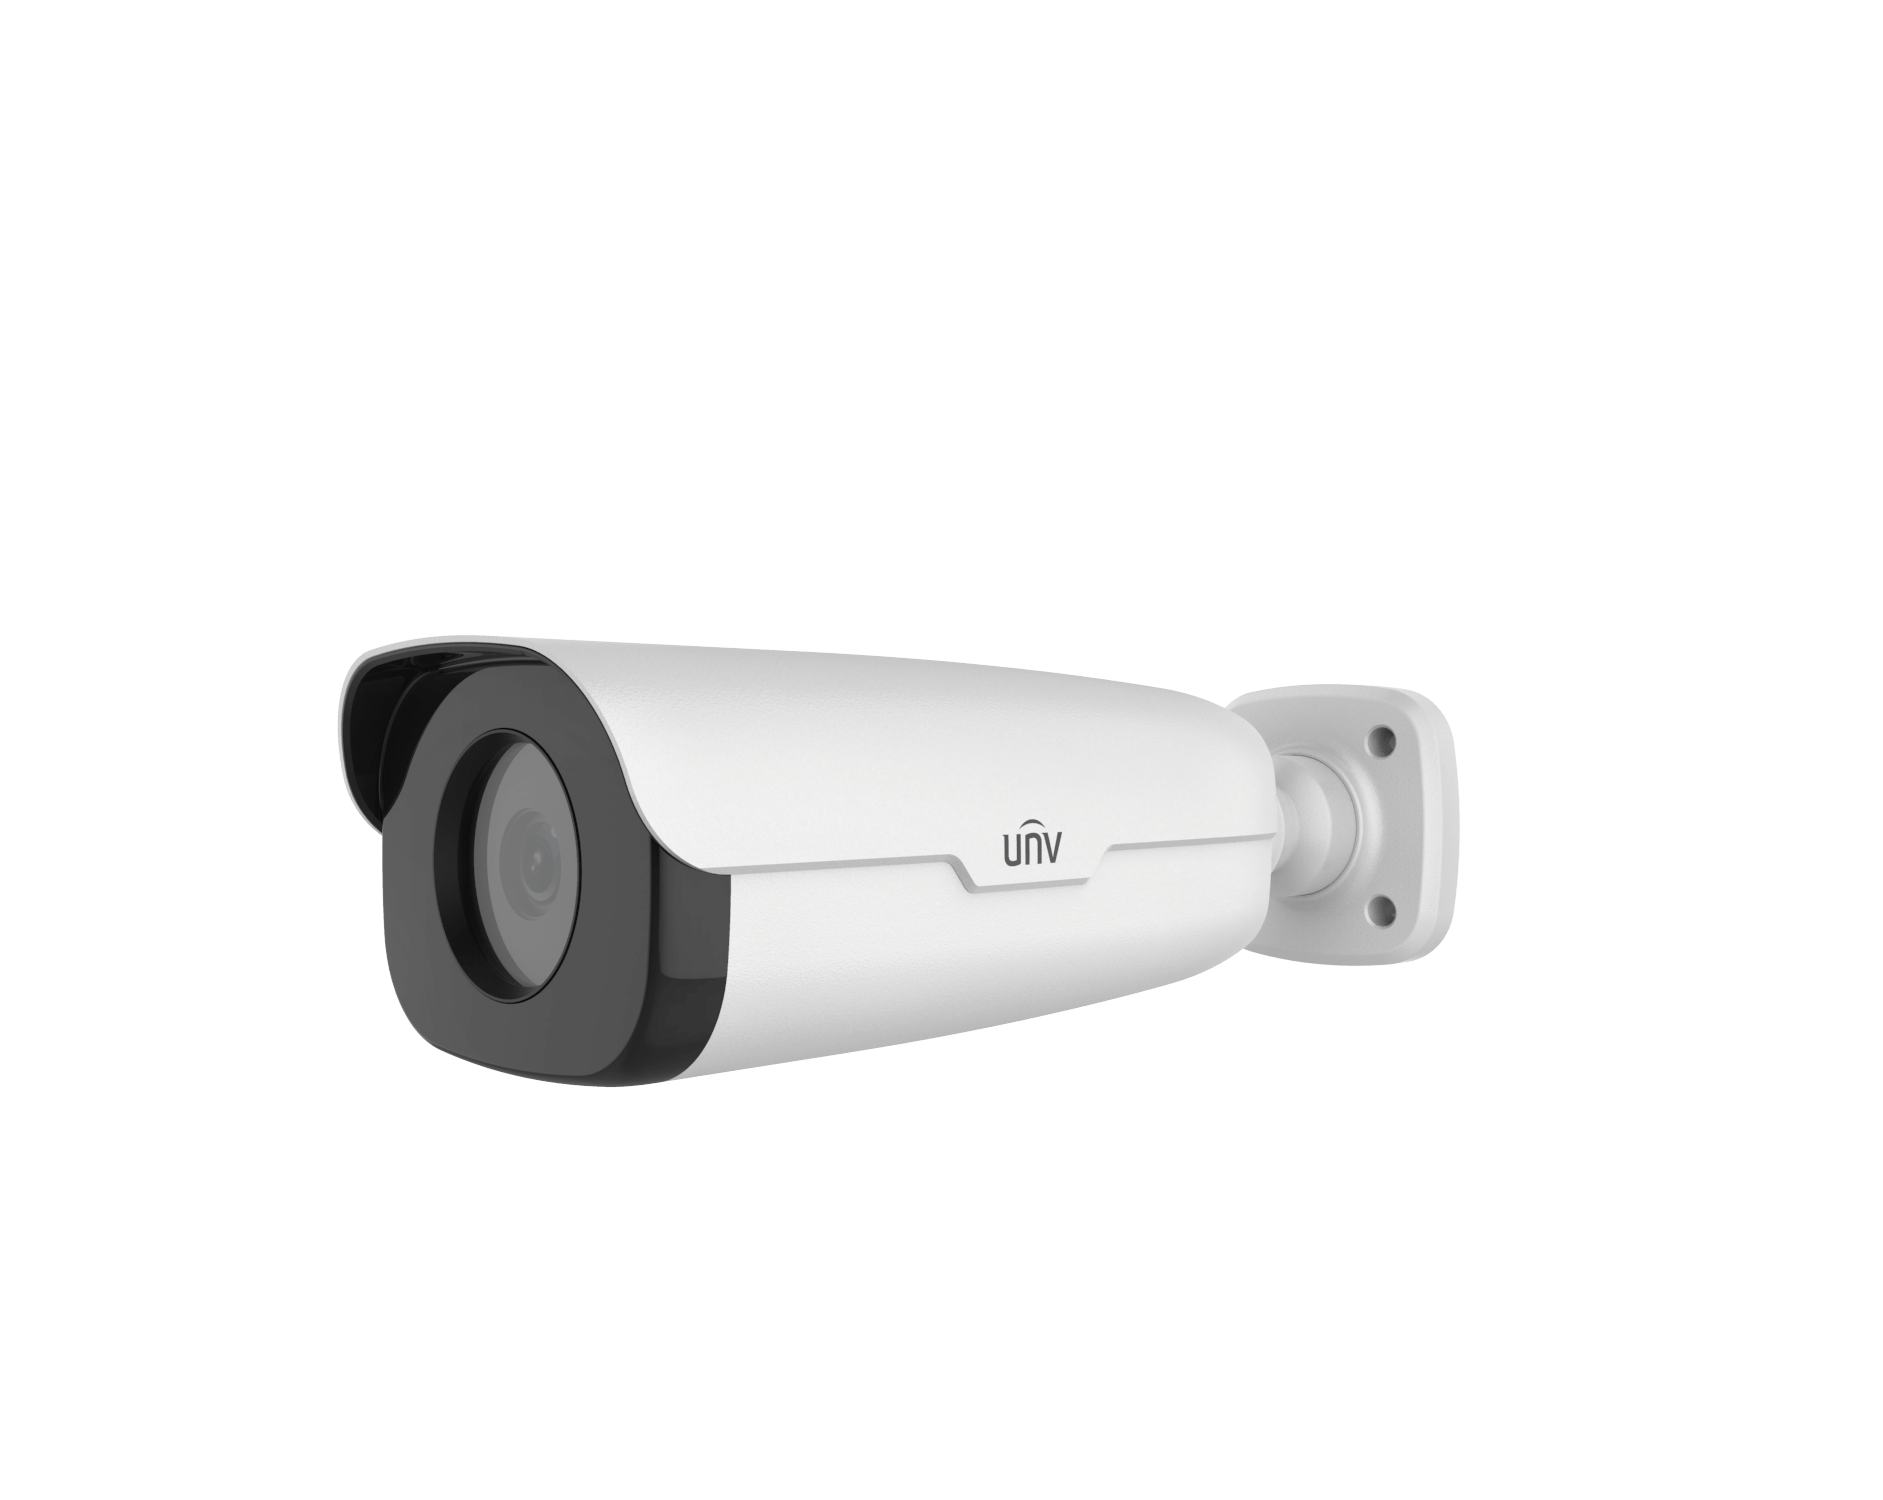 UNV - Ultra H.265 - 2MP 22x Optical Zoom Starlight WDR Bullet Camera